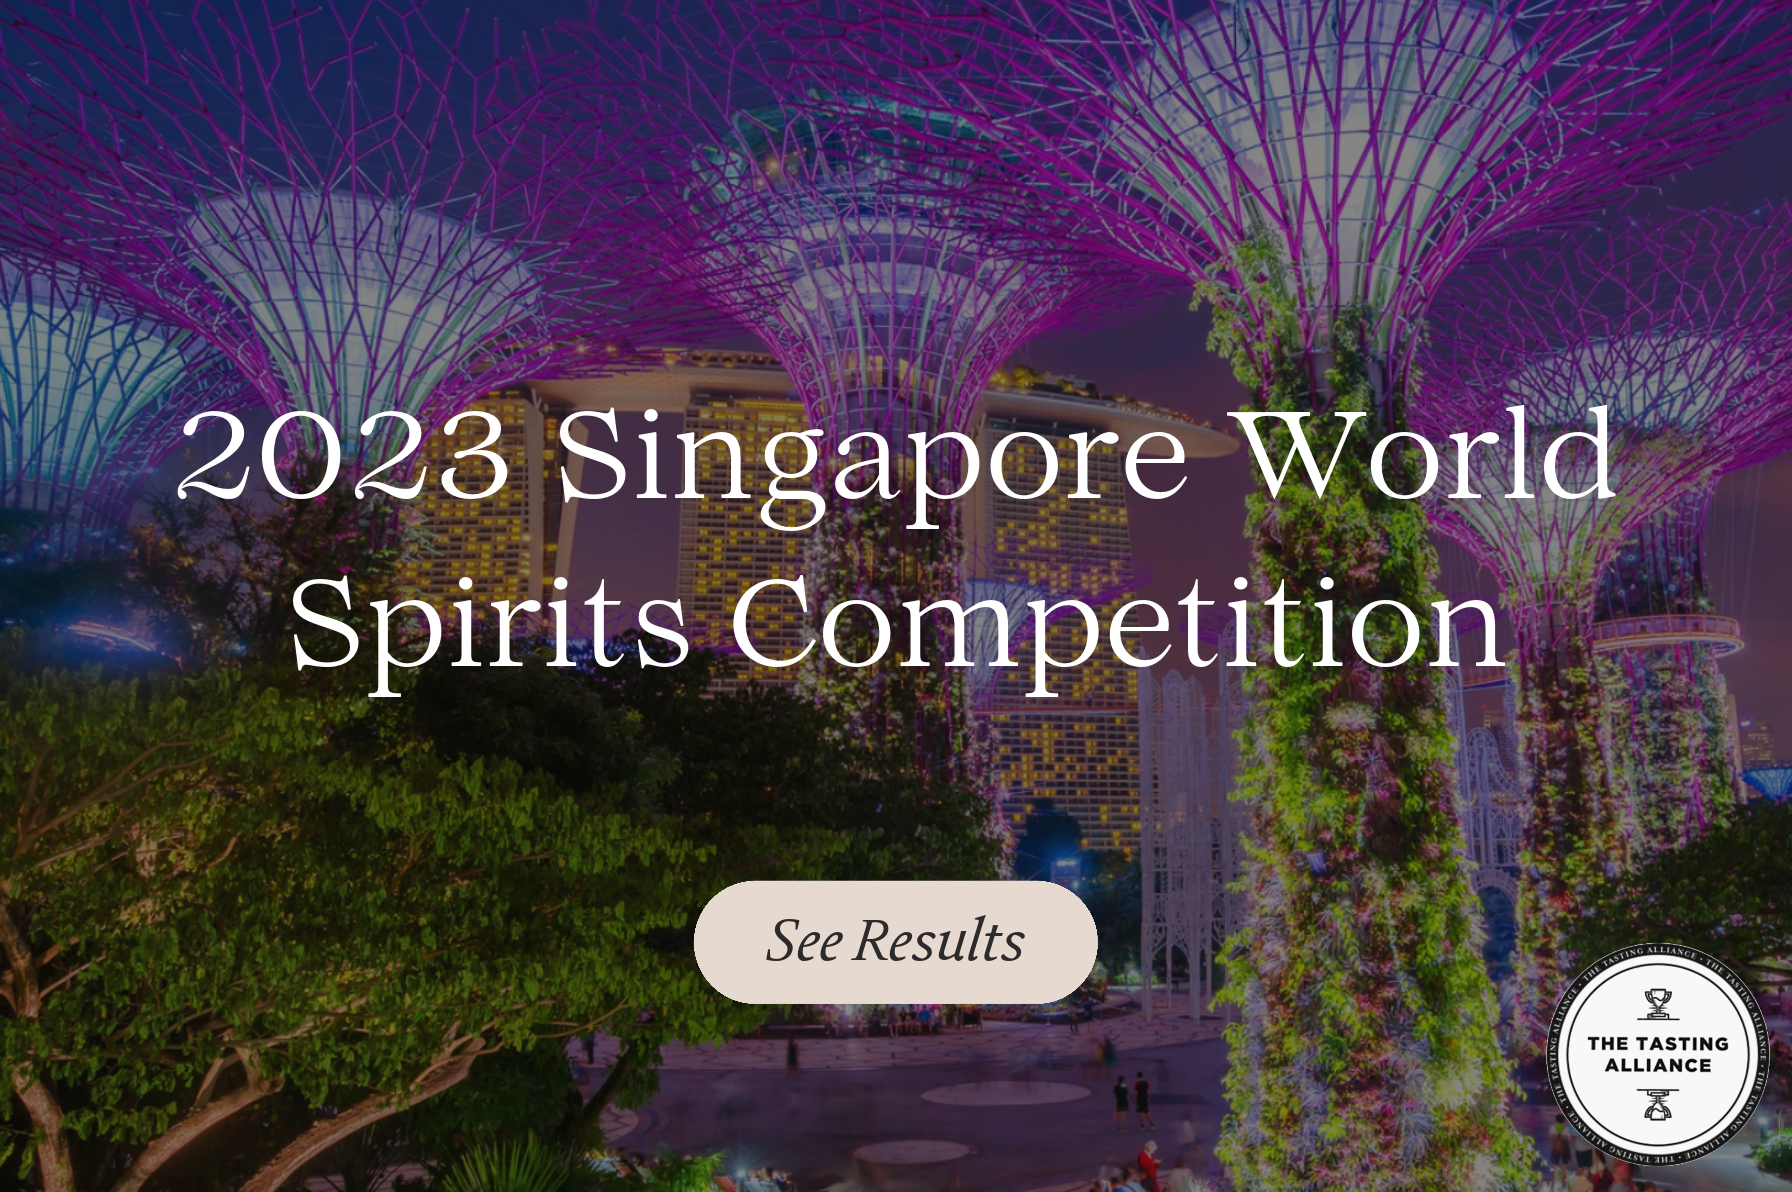 The results from the Singapore World Spirits Competition